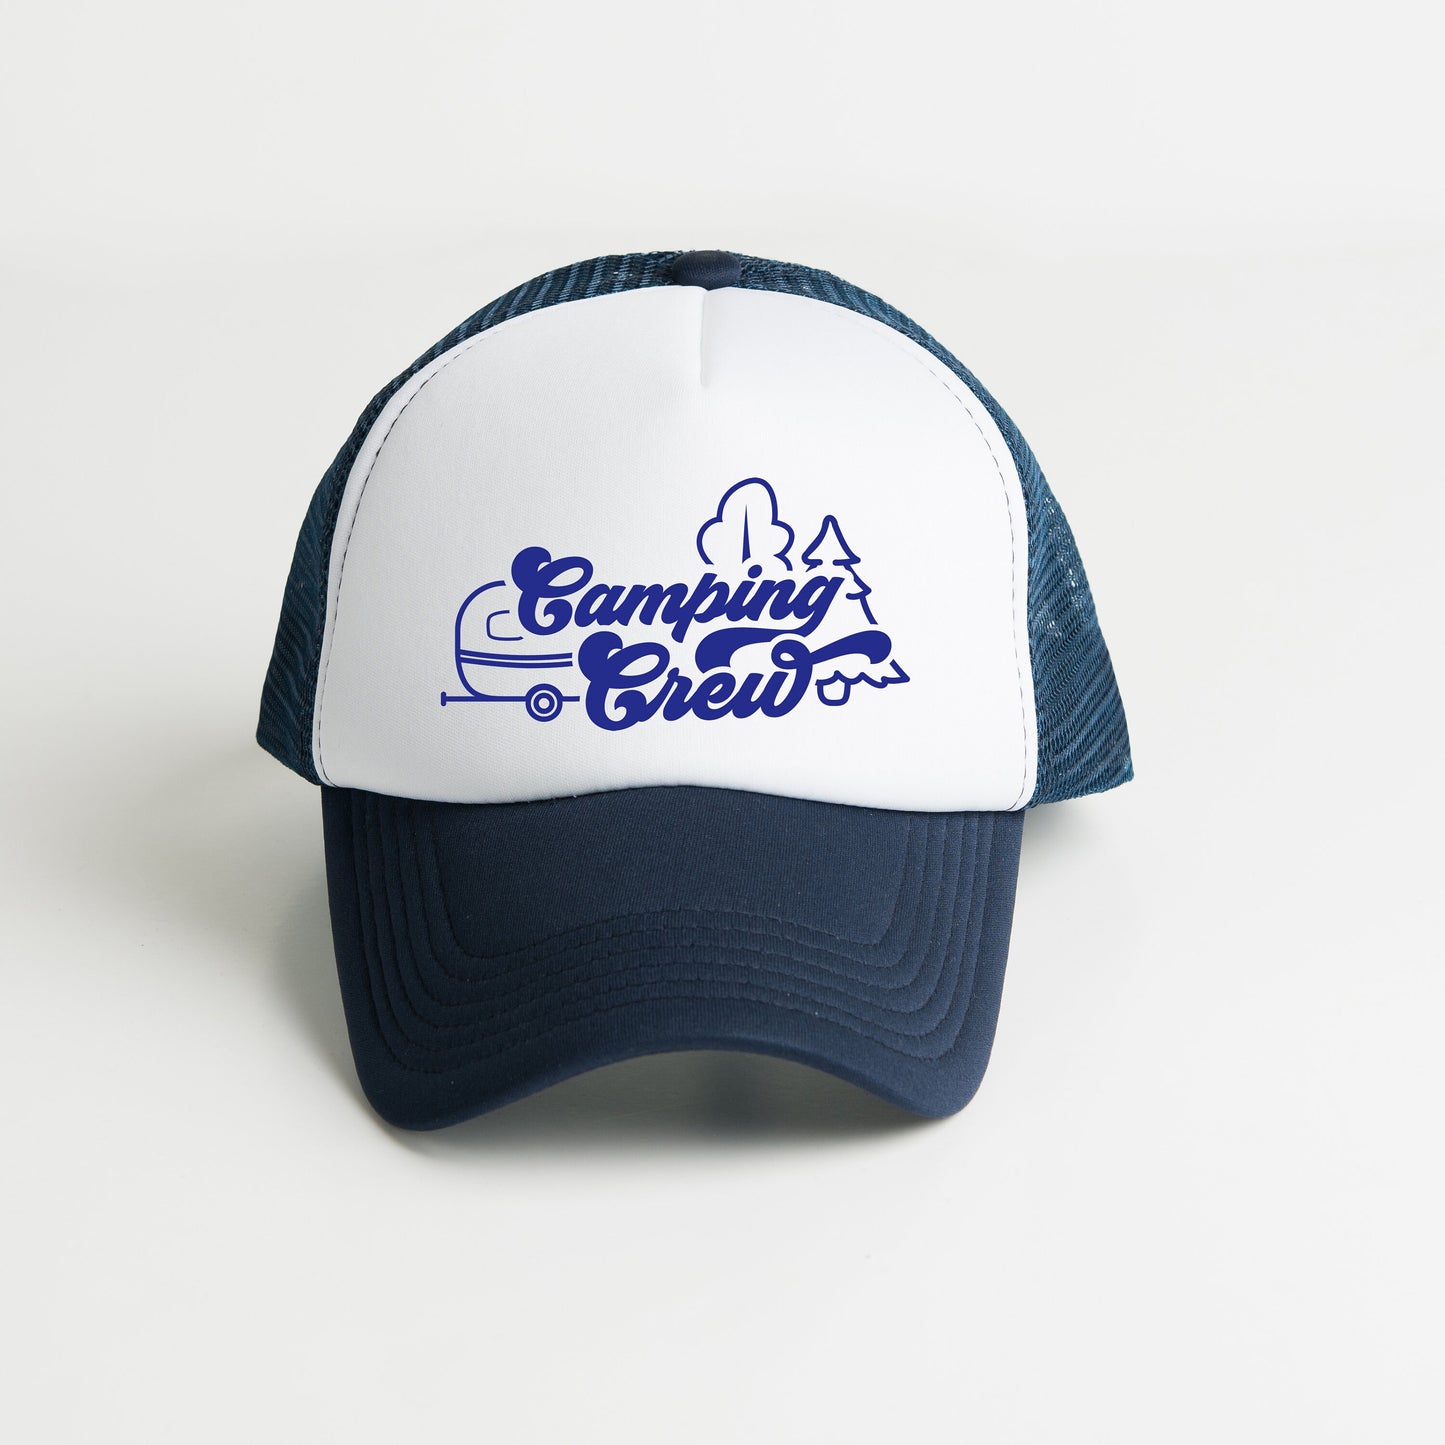 a blue and white trucker hat with a logo